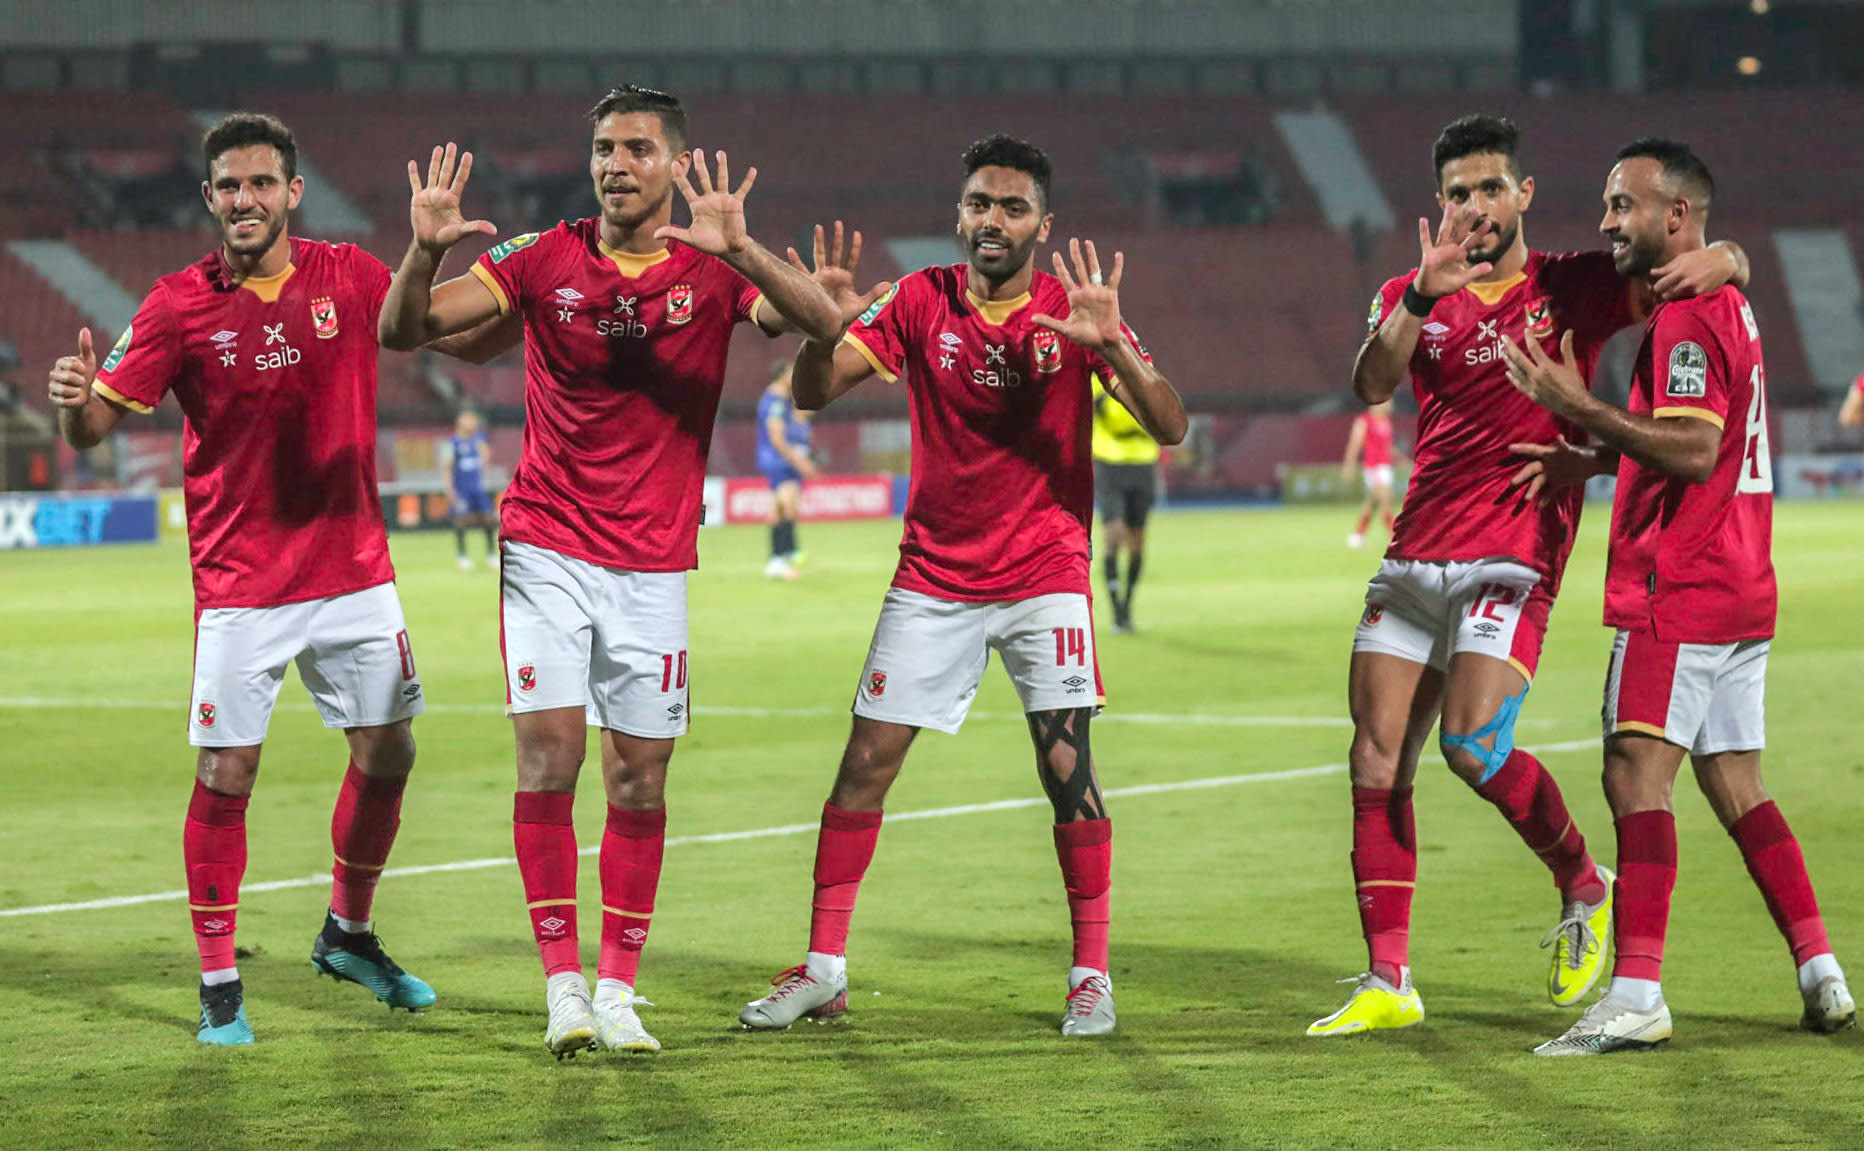 Al-Ahly is on a journey searching for a “new medal” in the Club World Cup